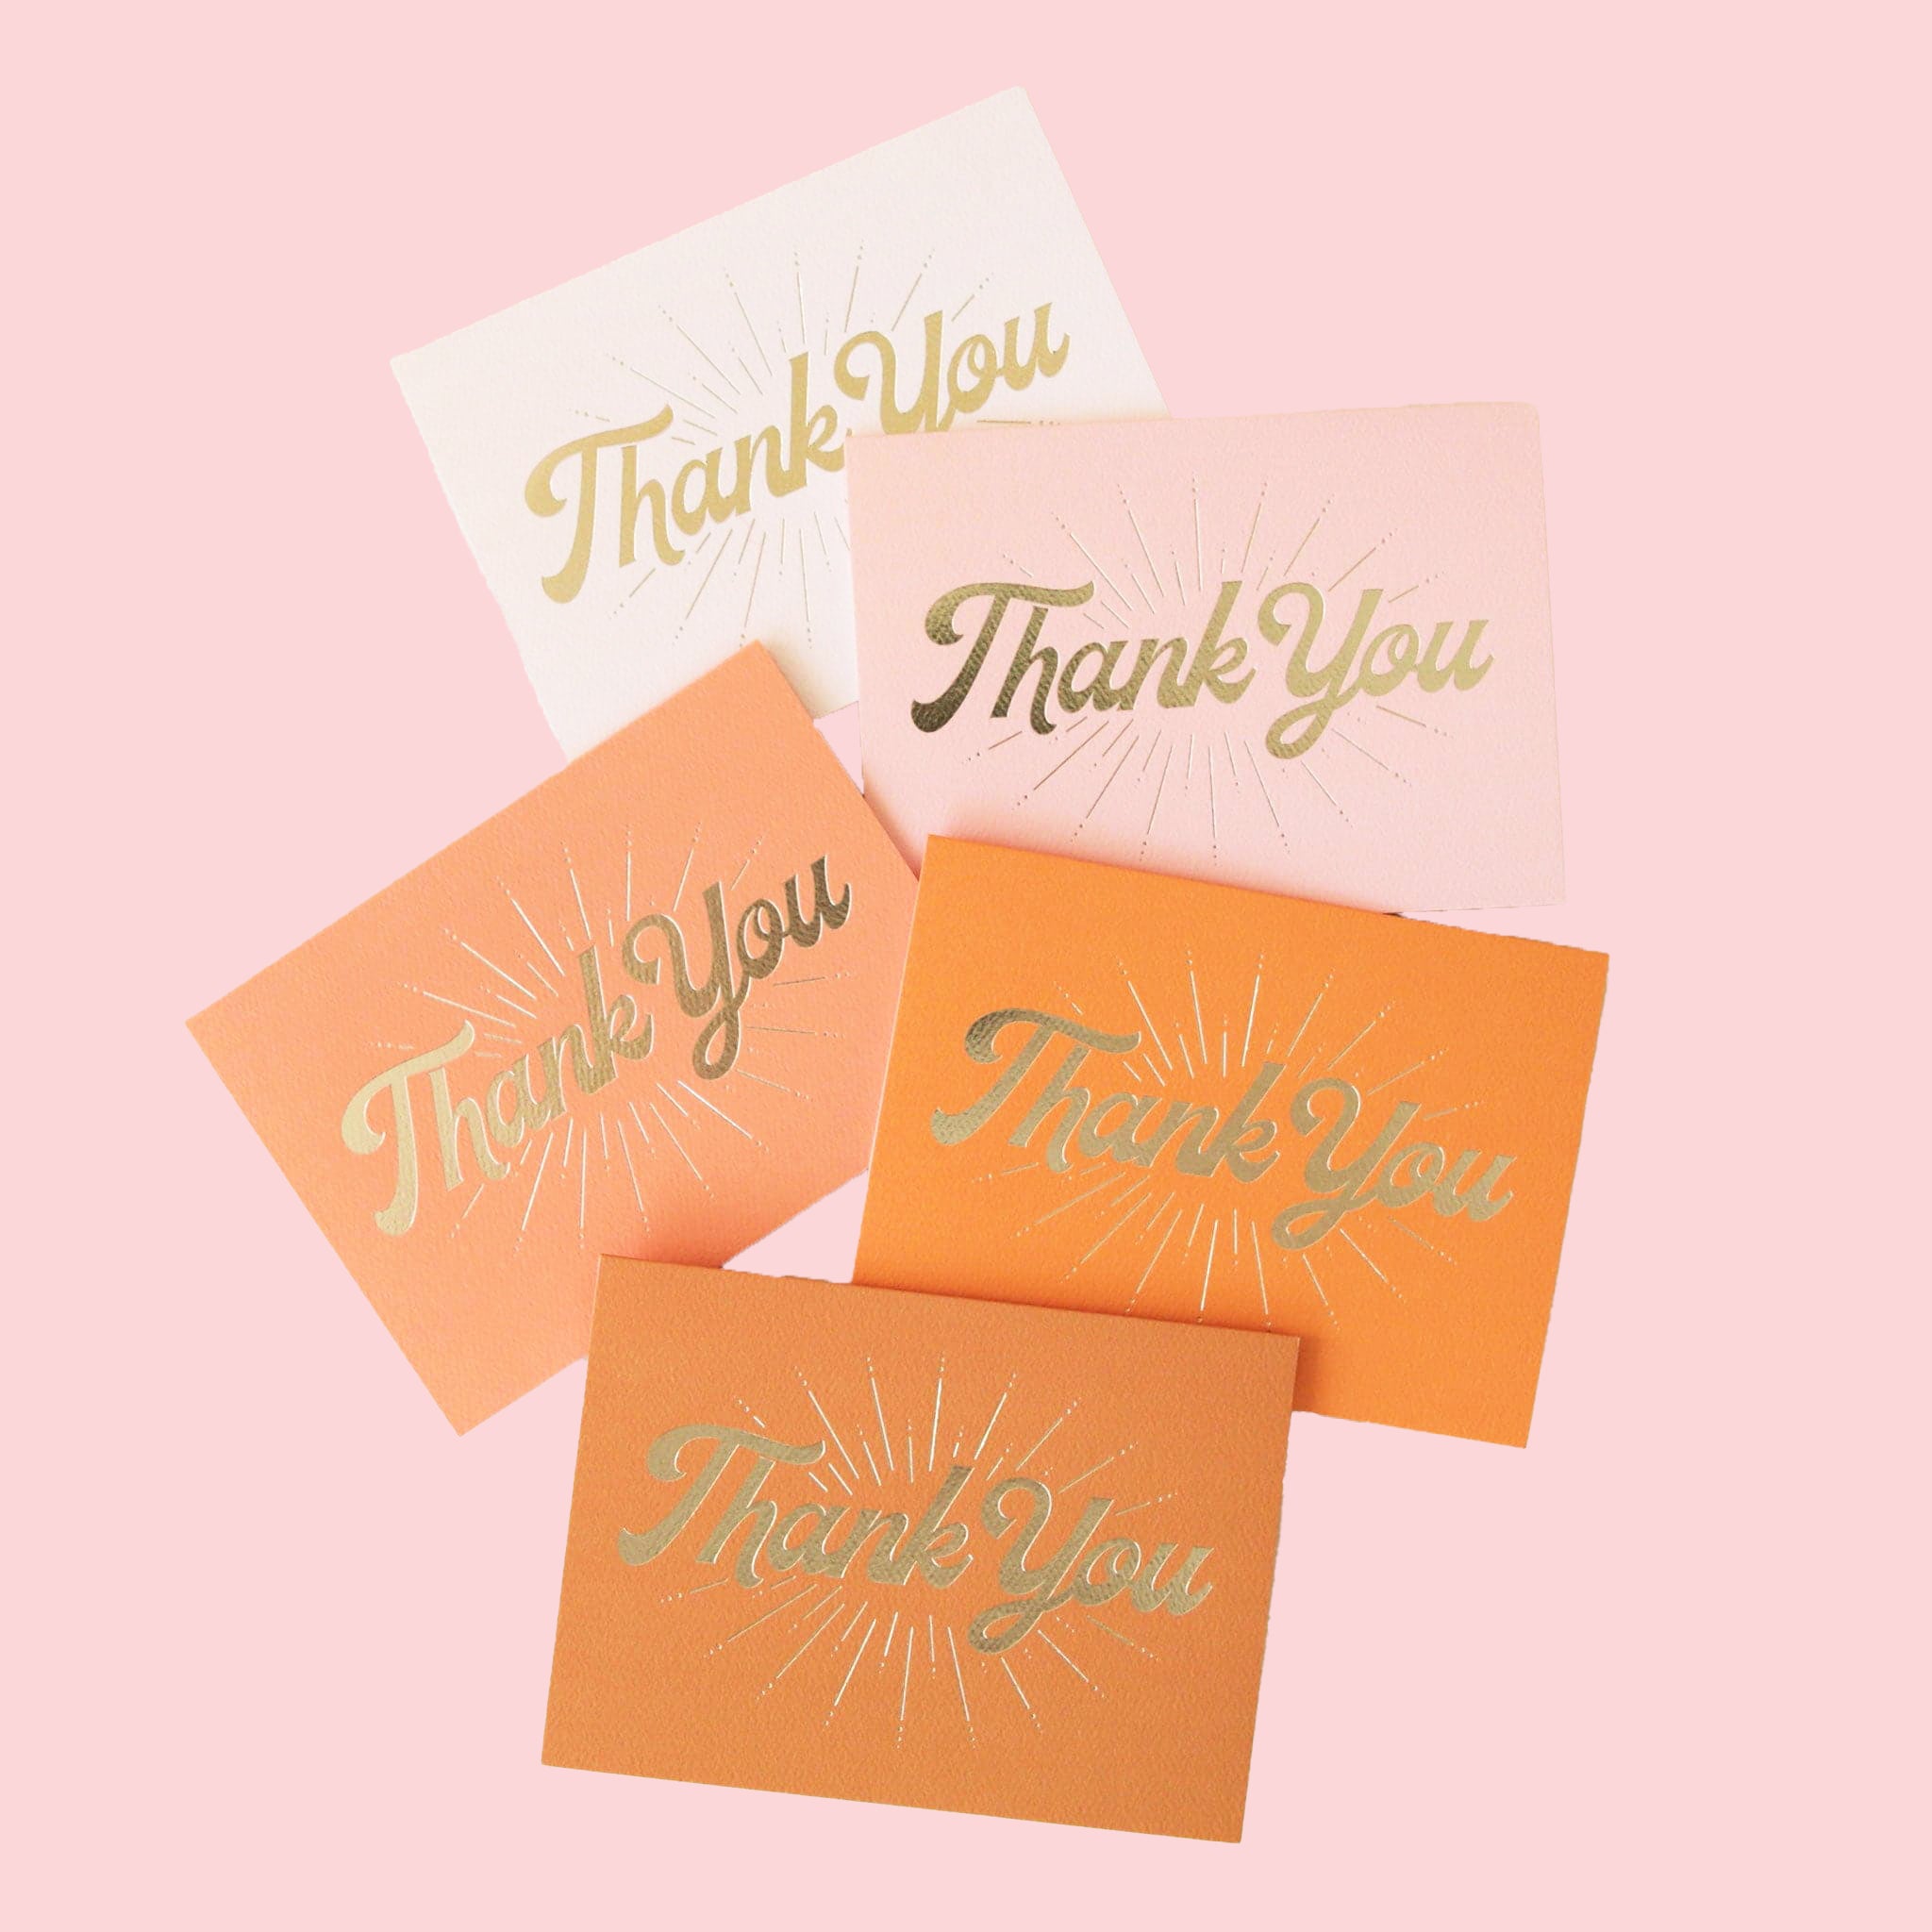 A pack of five different colored folded thank you cards with gold cursive font on the front that reads, "Thank You" along with gold line detailing. The colors range from ivory to light pink to terracotta.